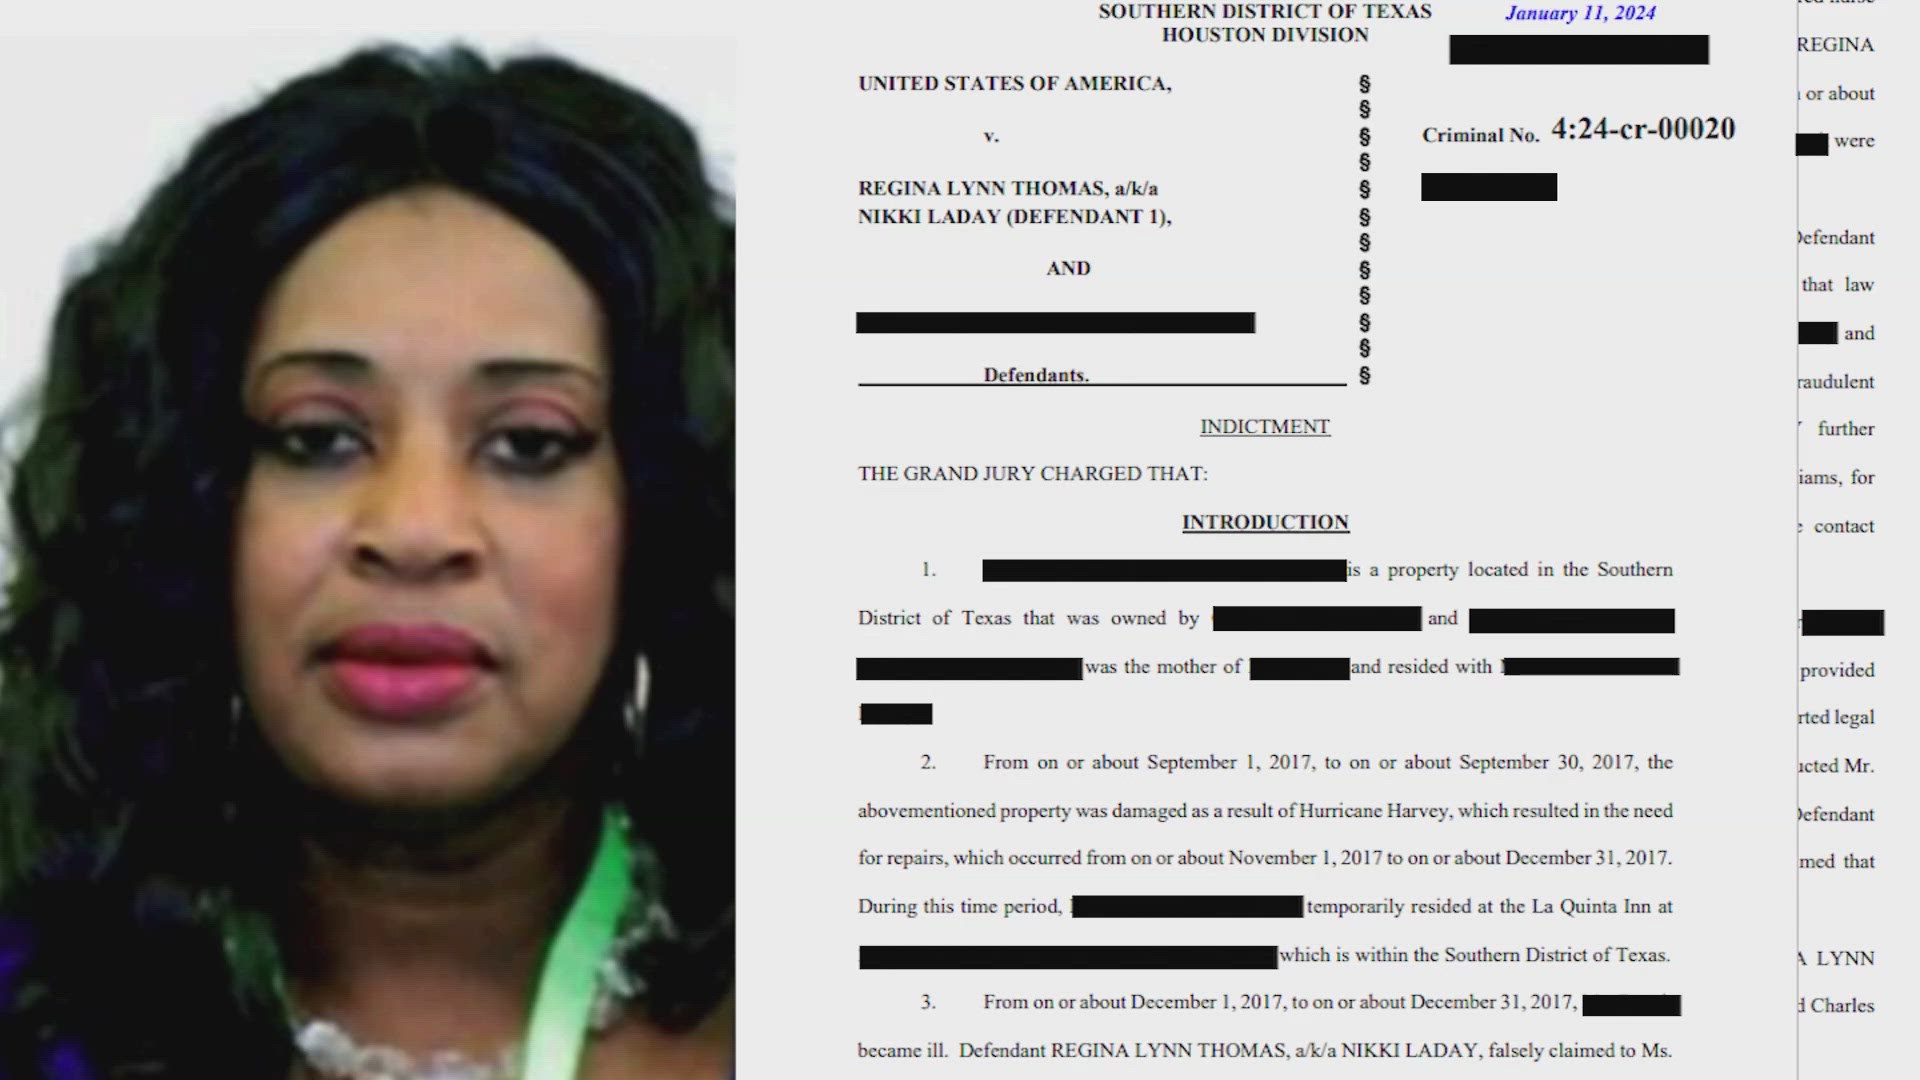 A federal warrant was issued for her arrest on January 12. She faces more than 65 charges of wire fraud and conspiracy to commit wire fraud, according to the FBI.